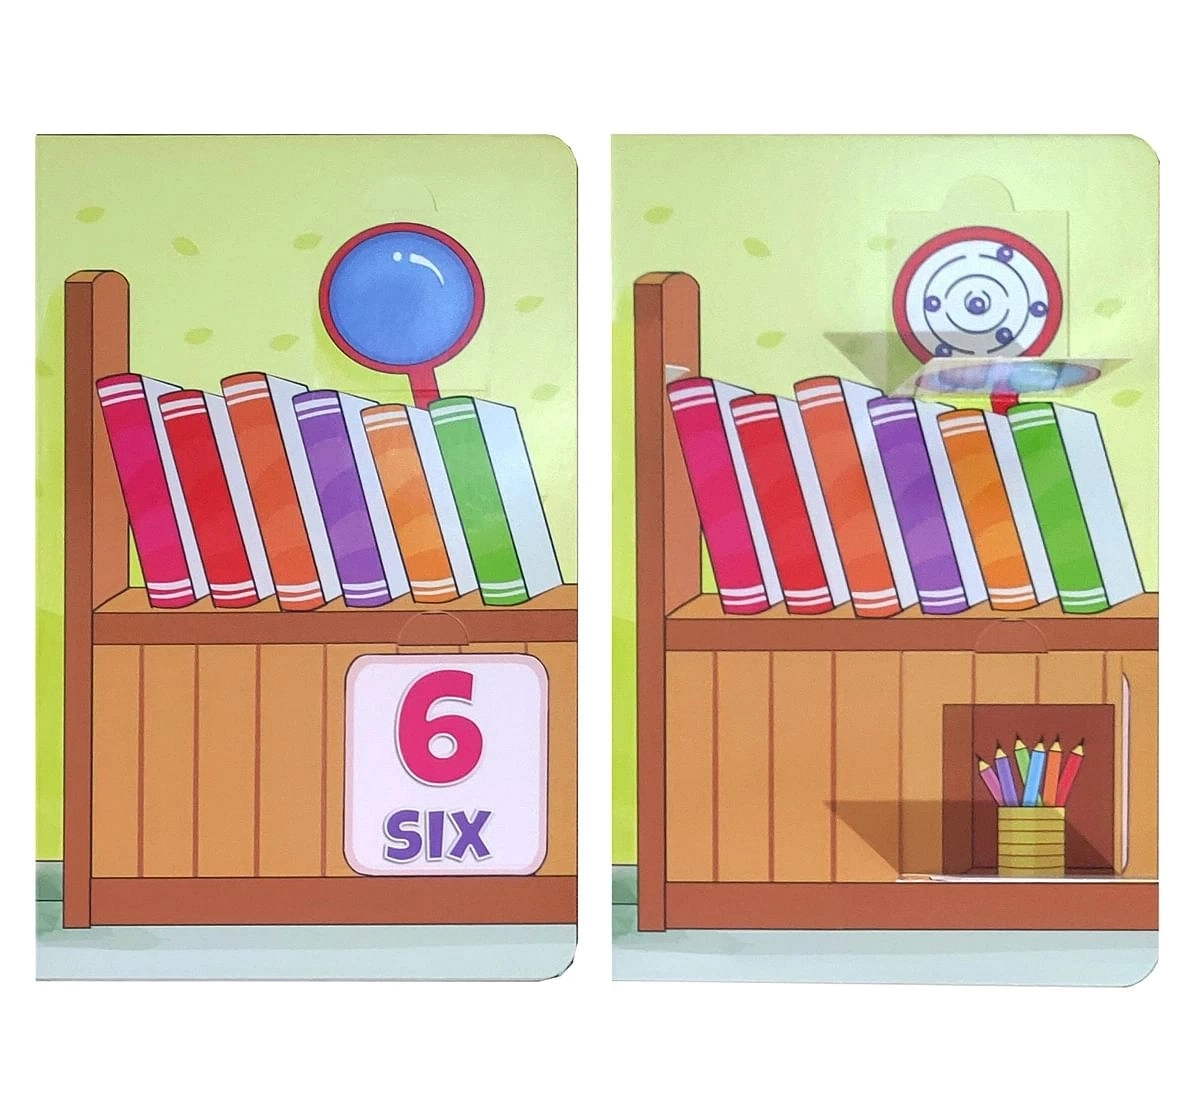 Wonder House Books Lift the Flap Numbers Early Learning Novelty Board Book for kids 0M+, Multicolour